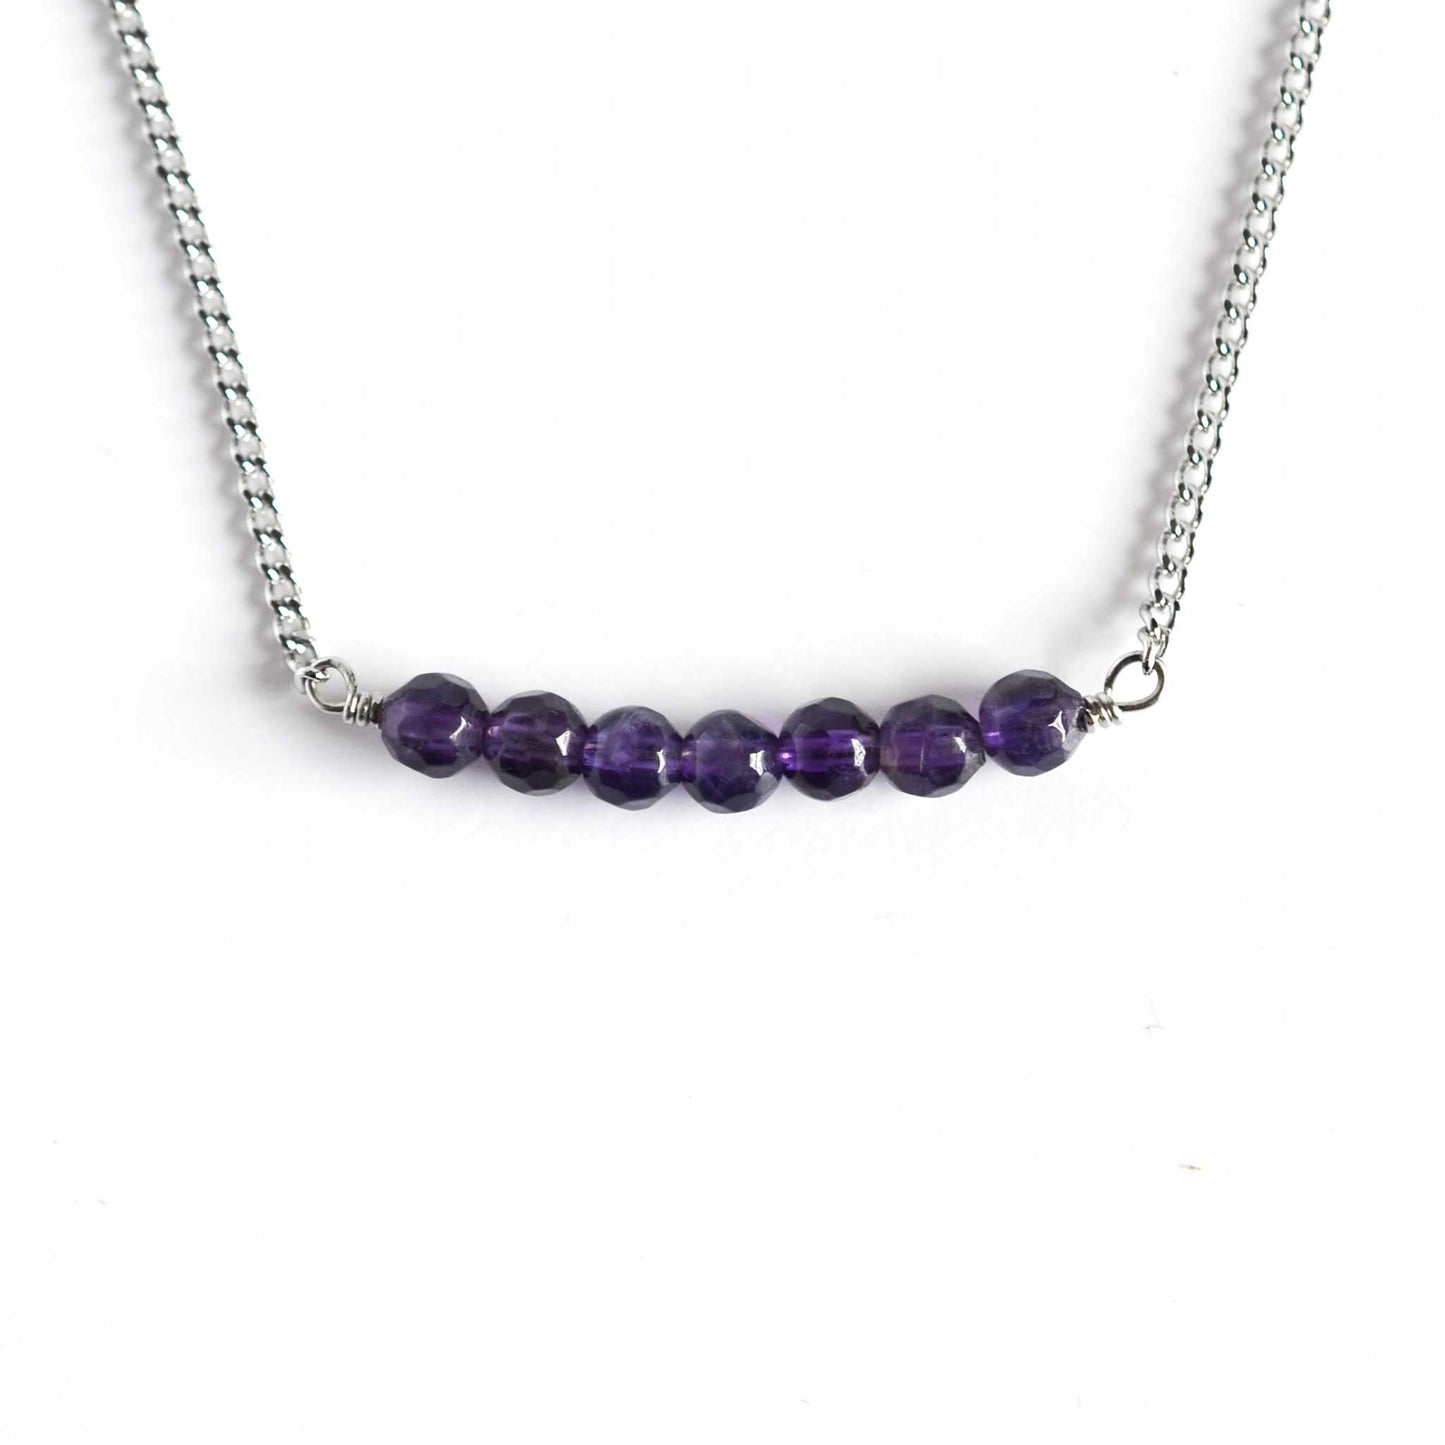 Dainty Amethyst necklace with stainless steel chain on white background